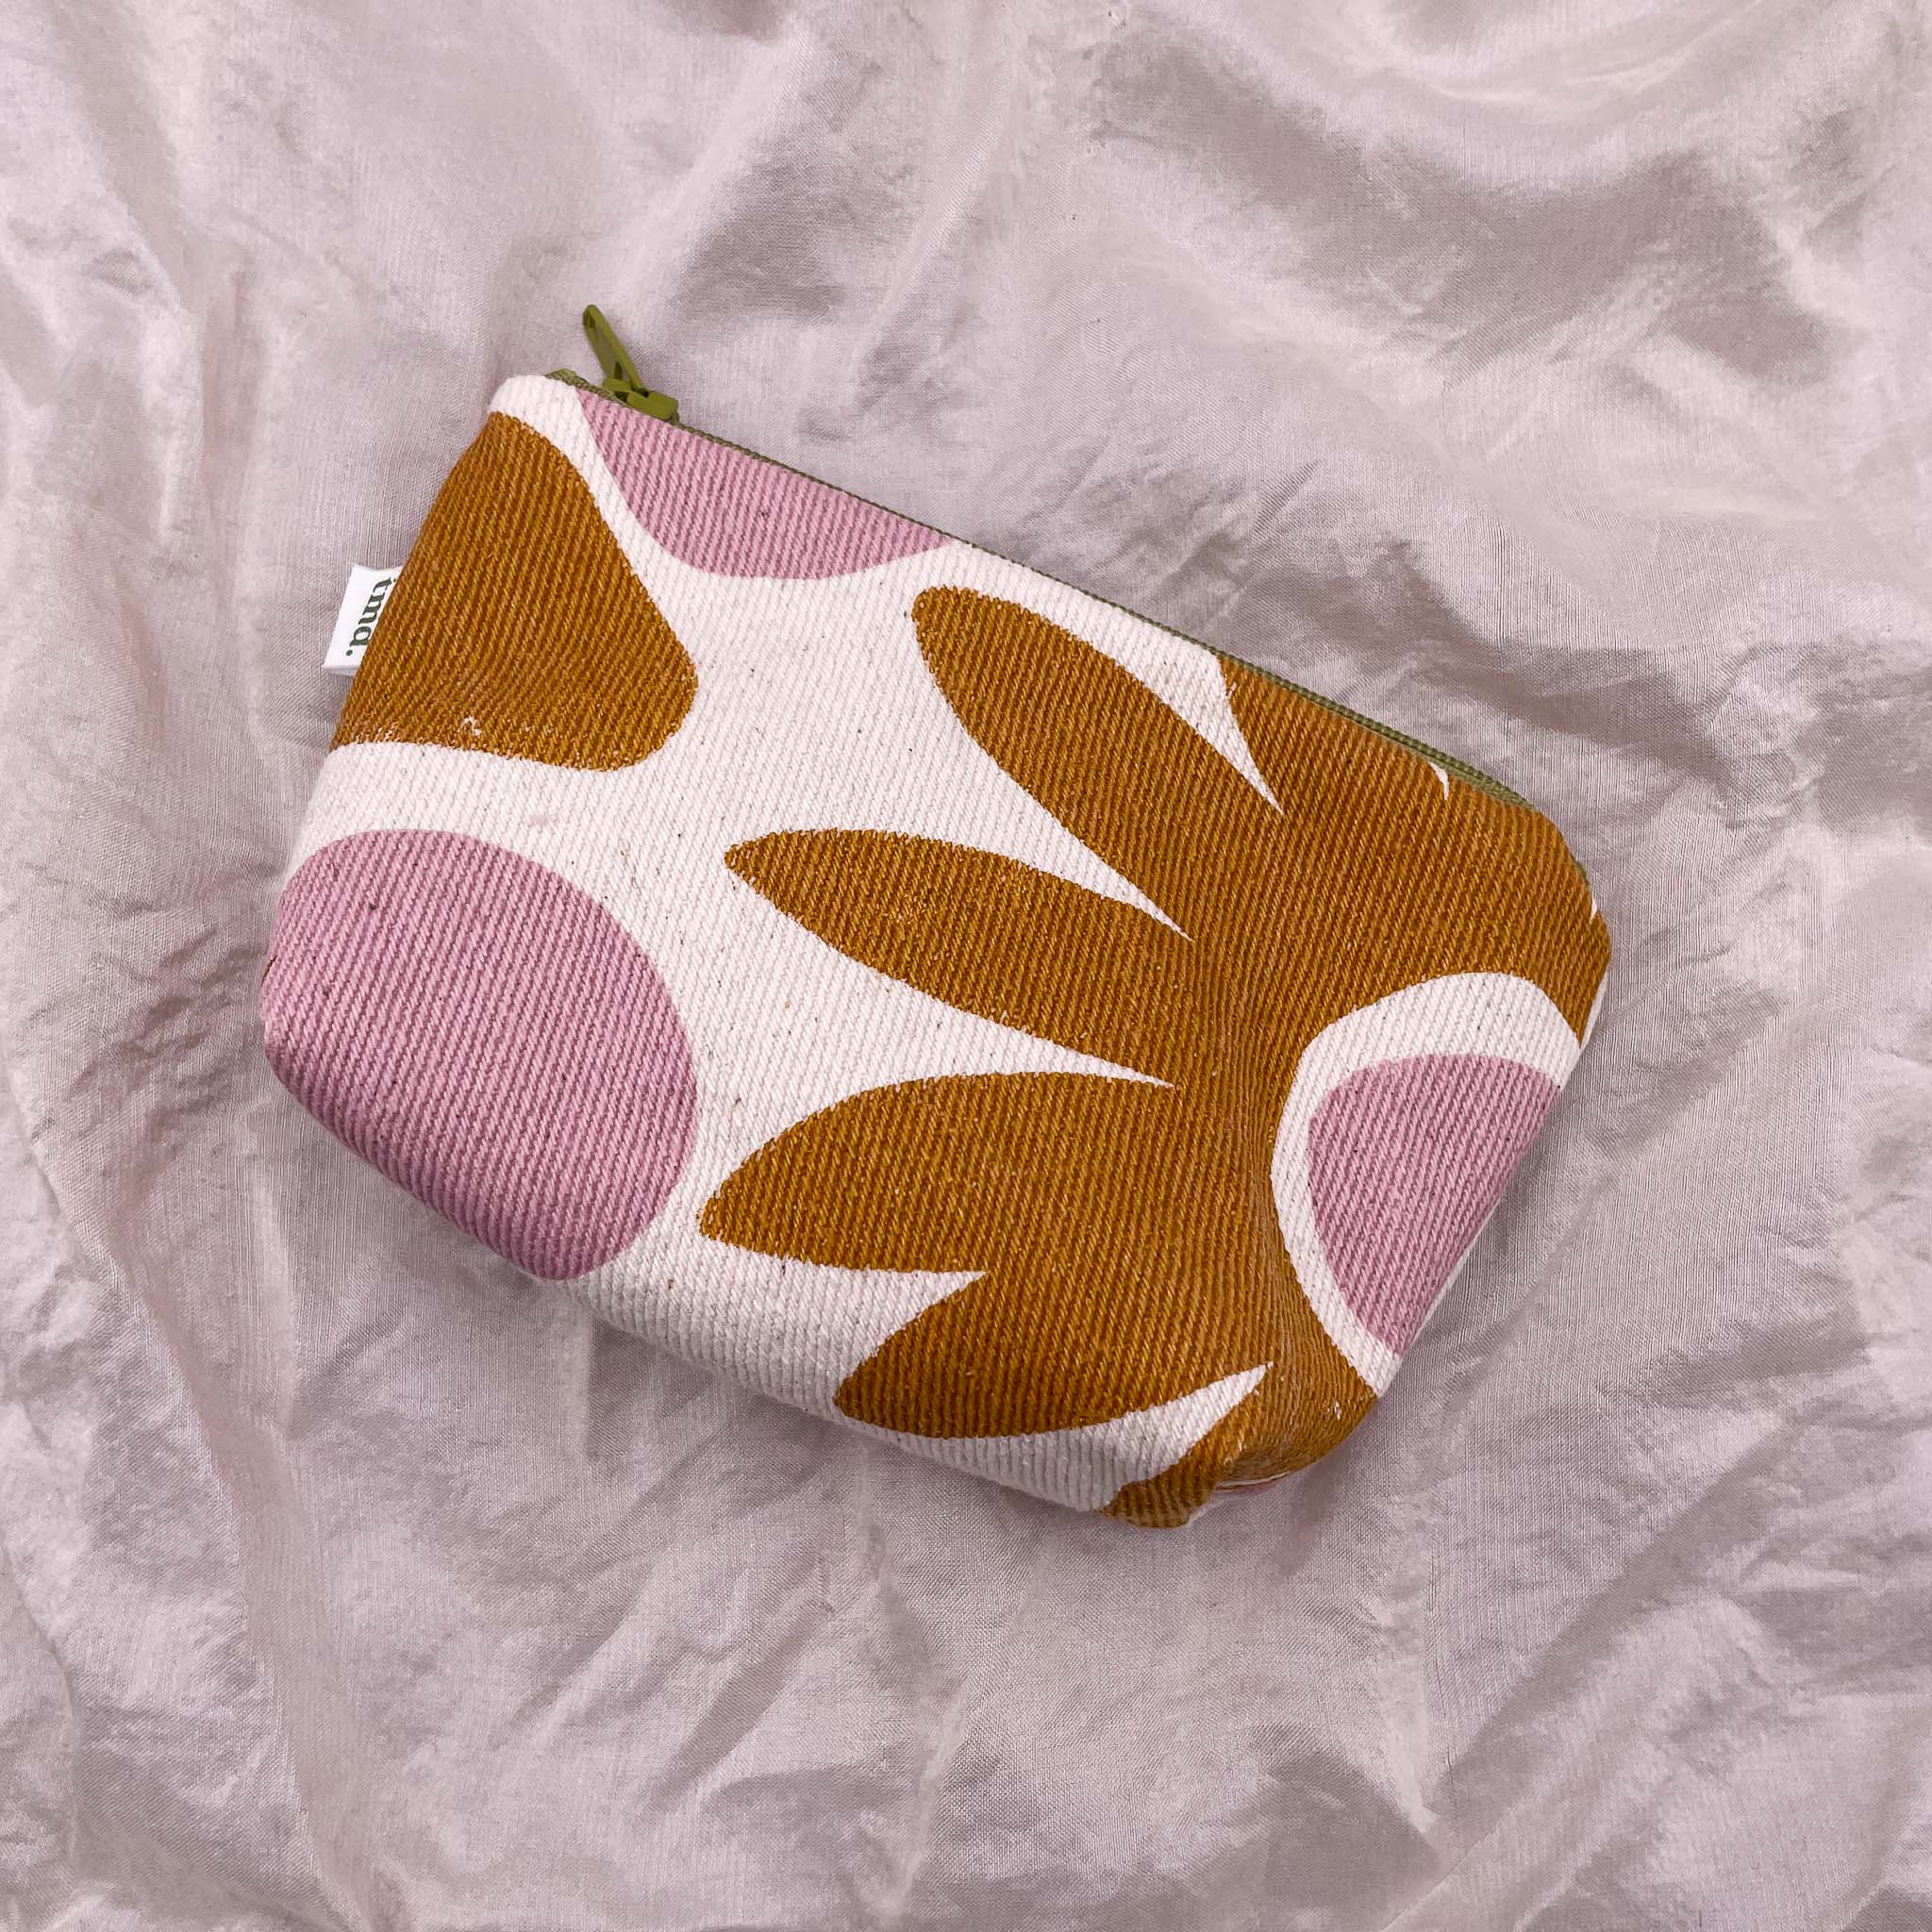 Little Bag - Abstract Floral in Dusty Pink and Ochre on Denim